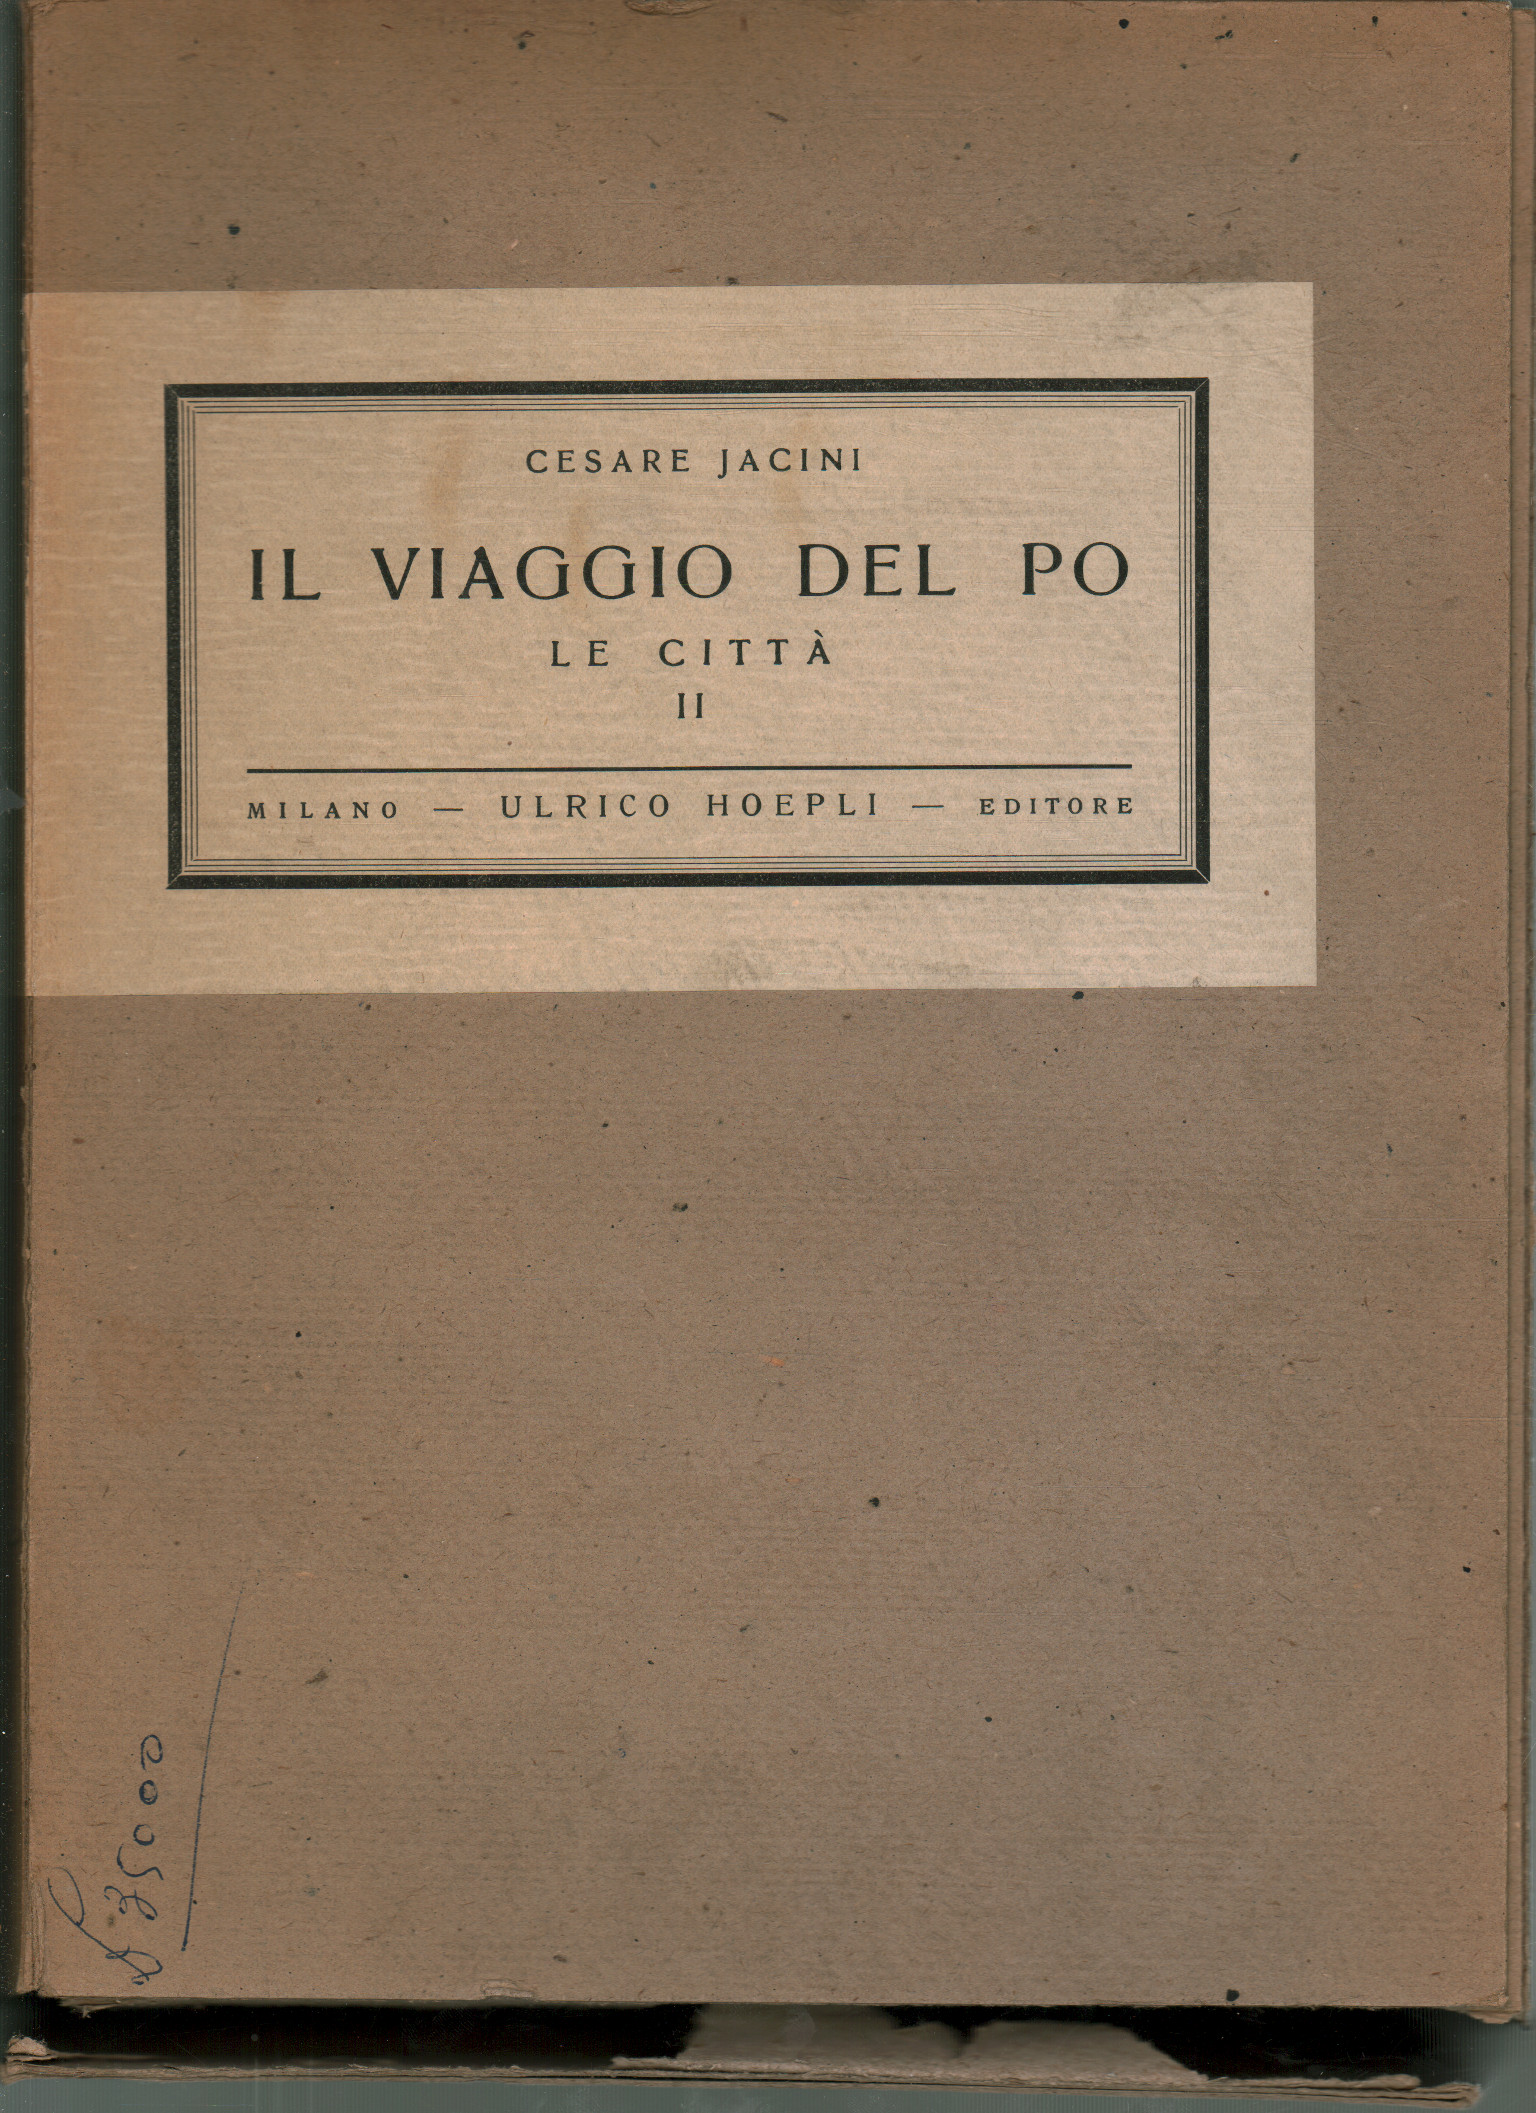 The journey of the Po. Vol.V. The cities. Part II. Lom, Cesare Jacini